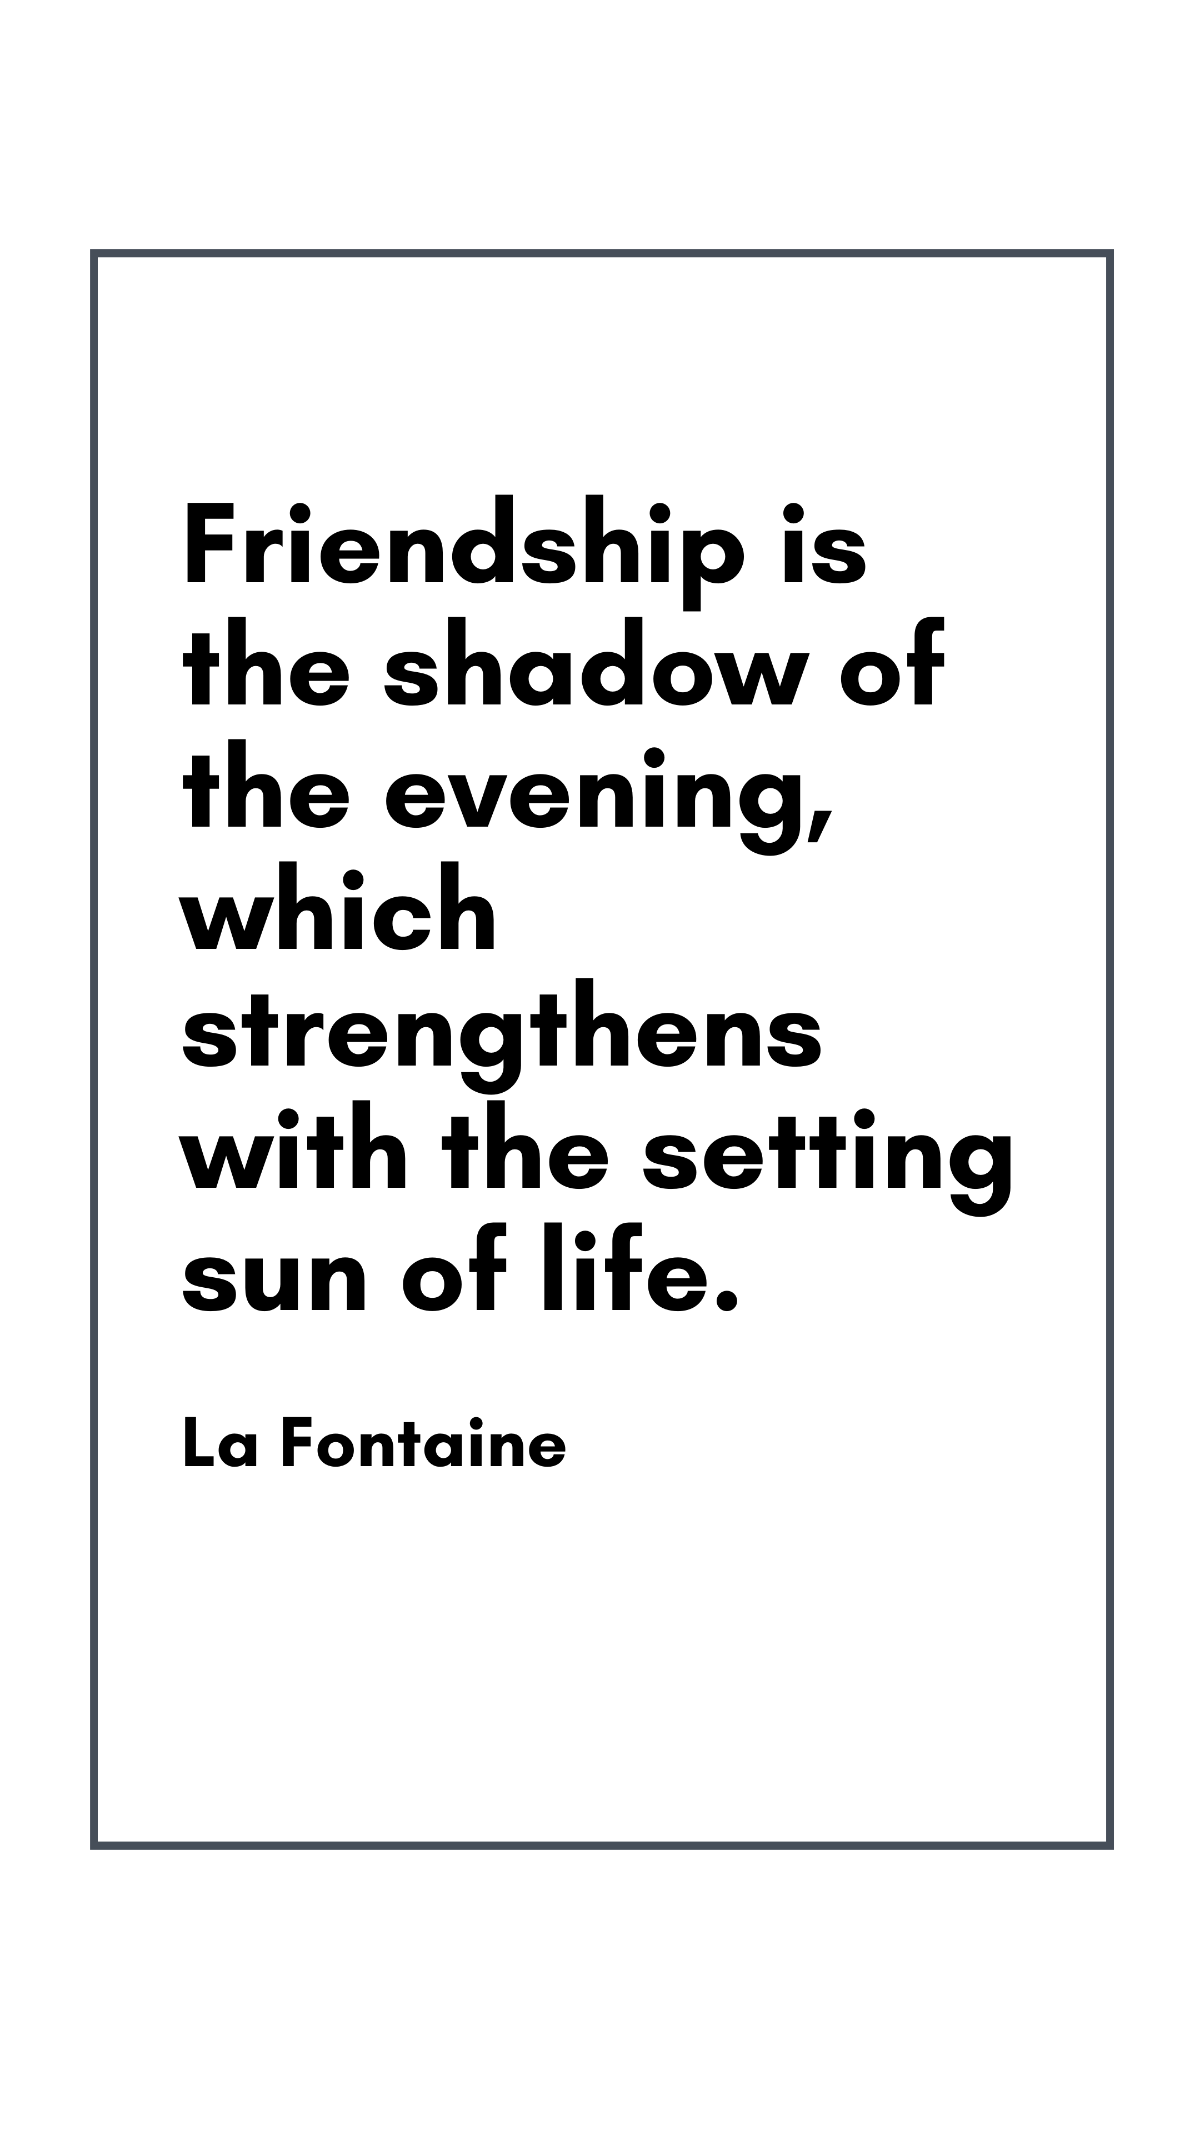 La Fontaine - Friendship is the shadow of the evening, which strengthens with the setting sun of life. Template